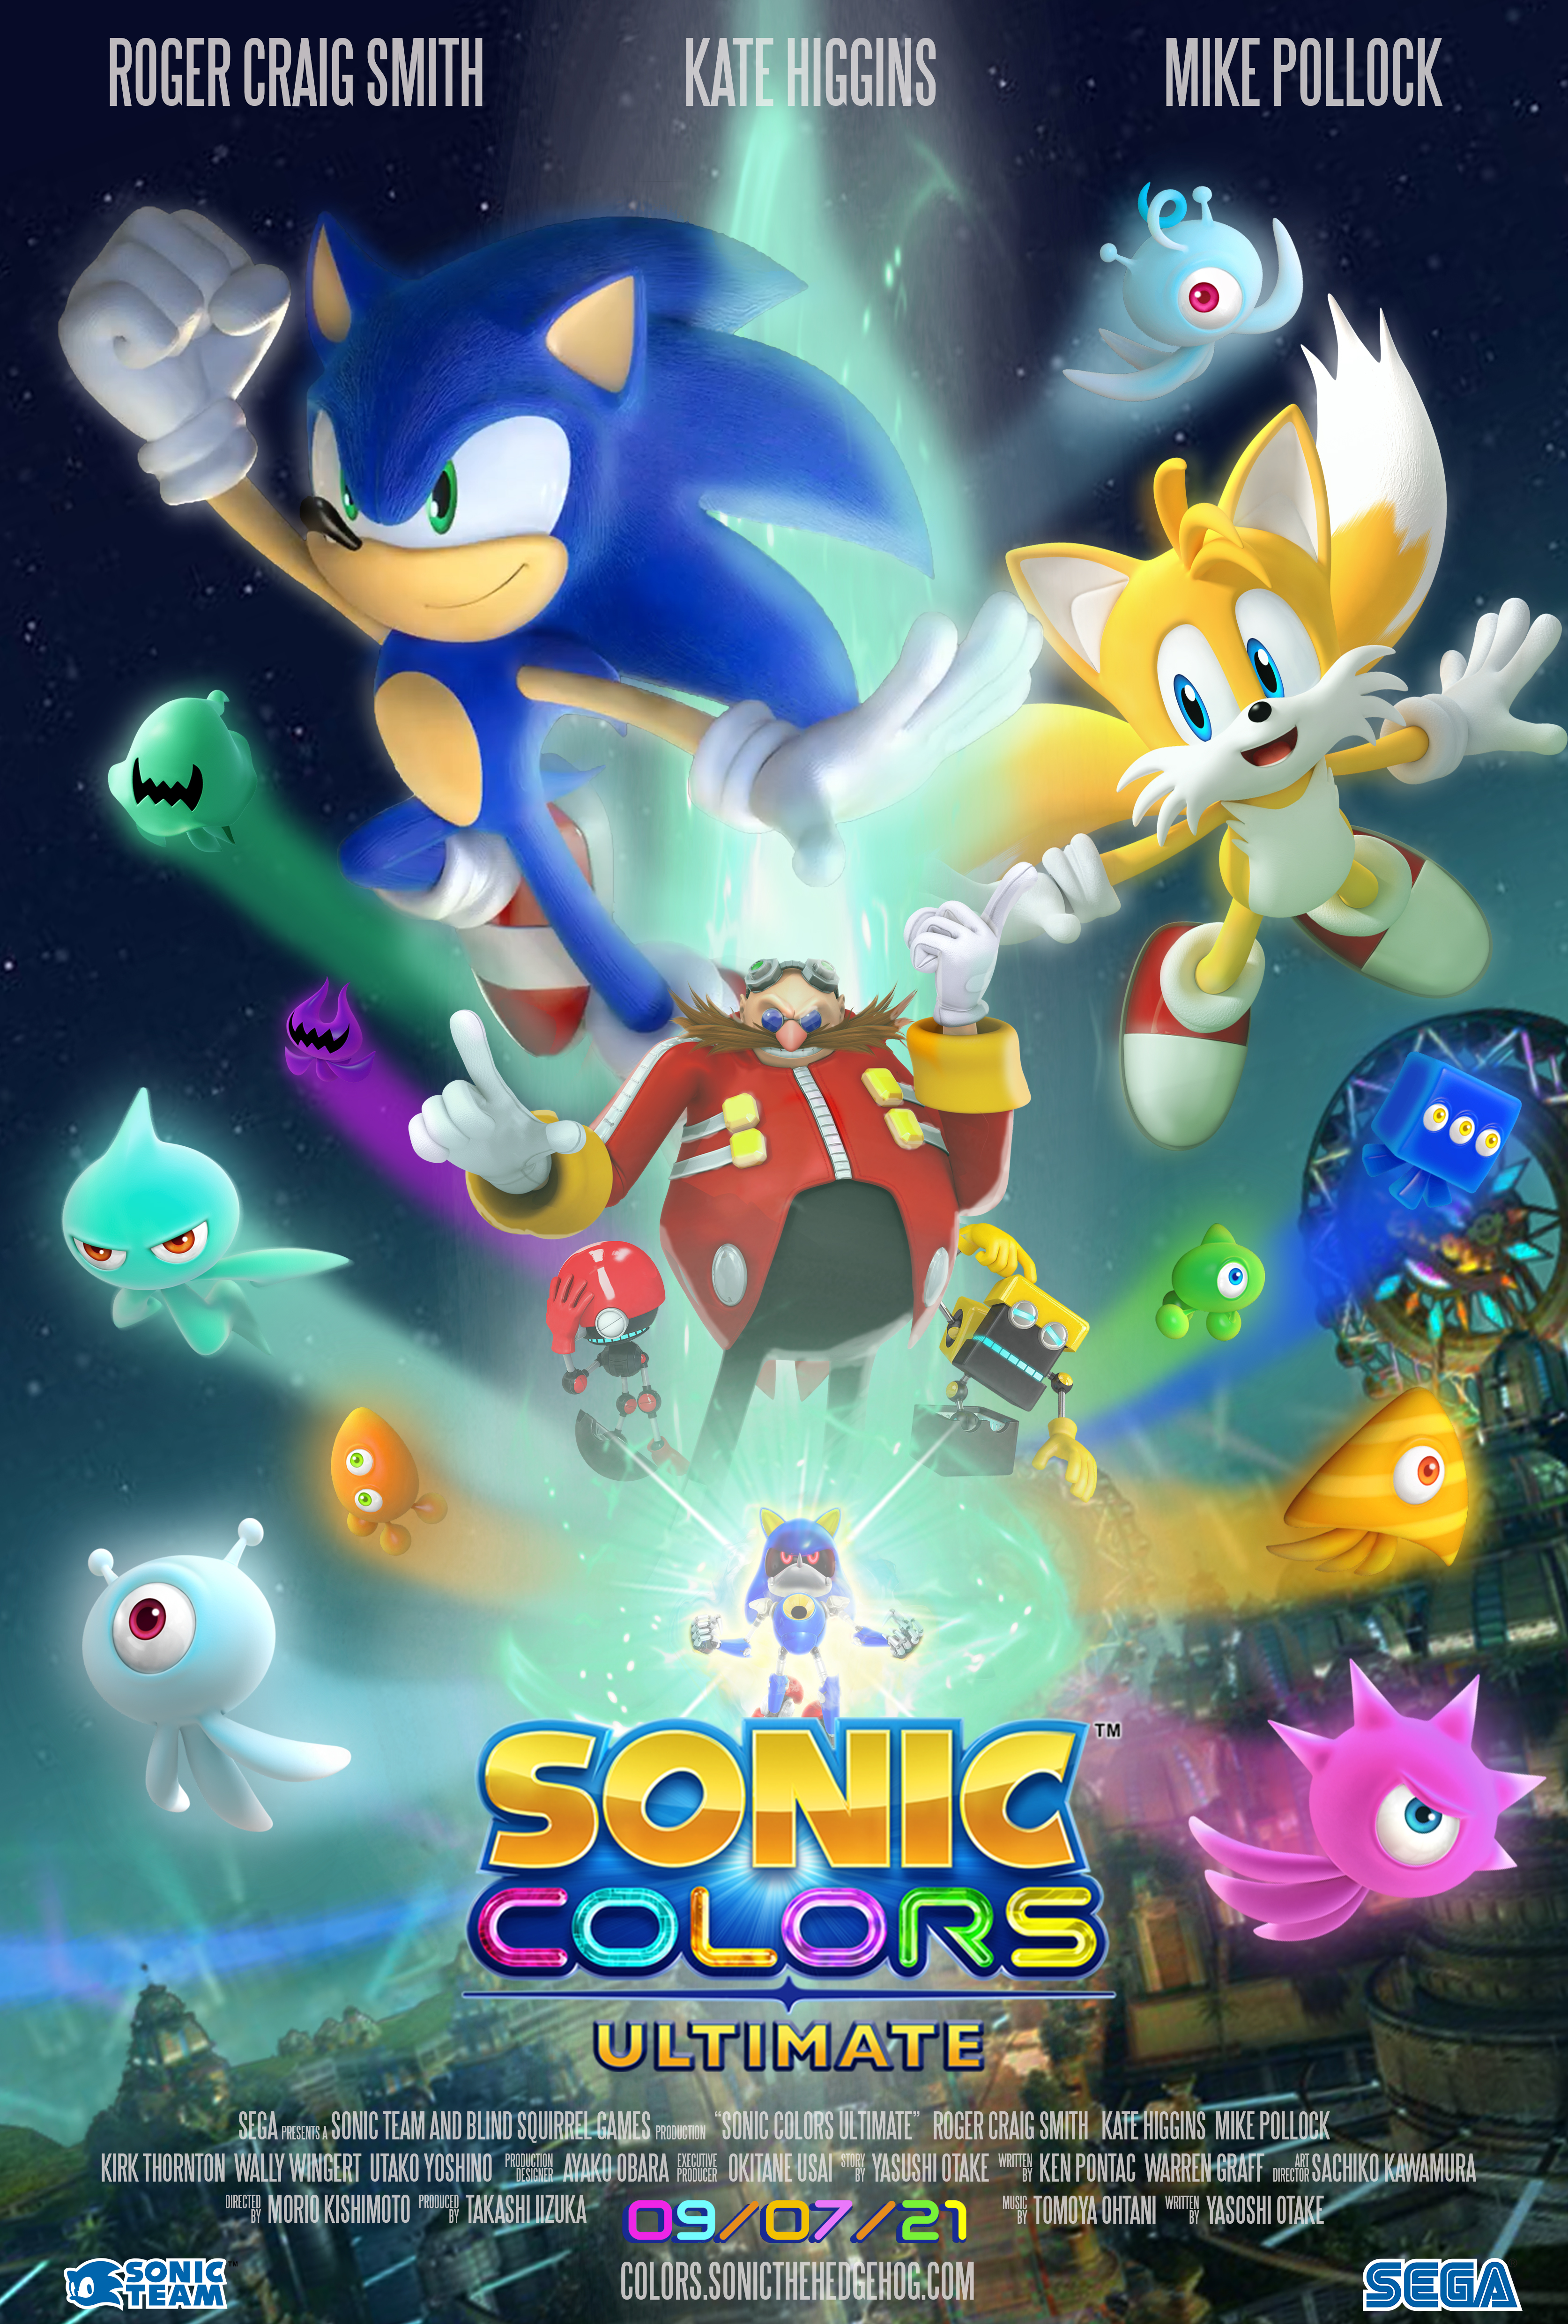 Sonic Colors: Ultimate Poster by Acquainted-Guy on DeviantArt